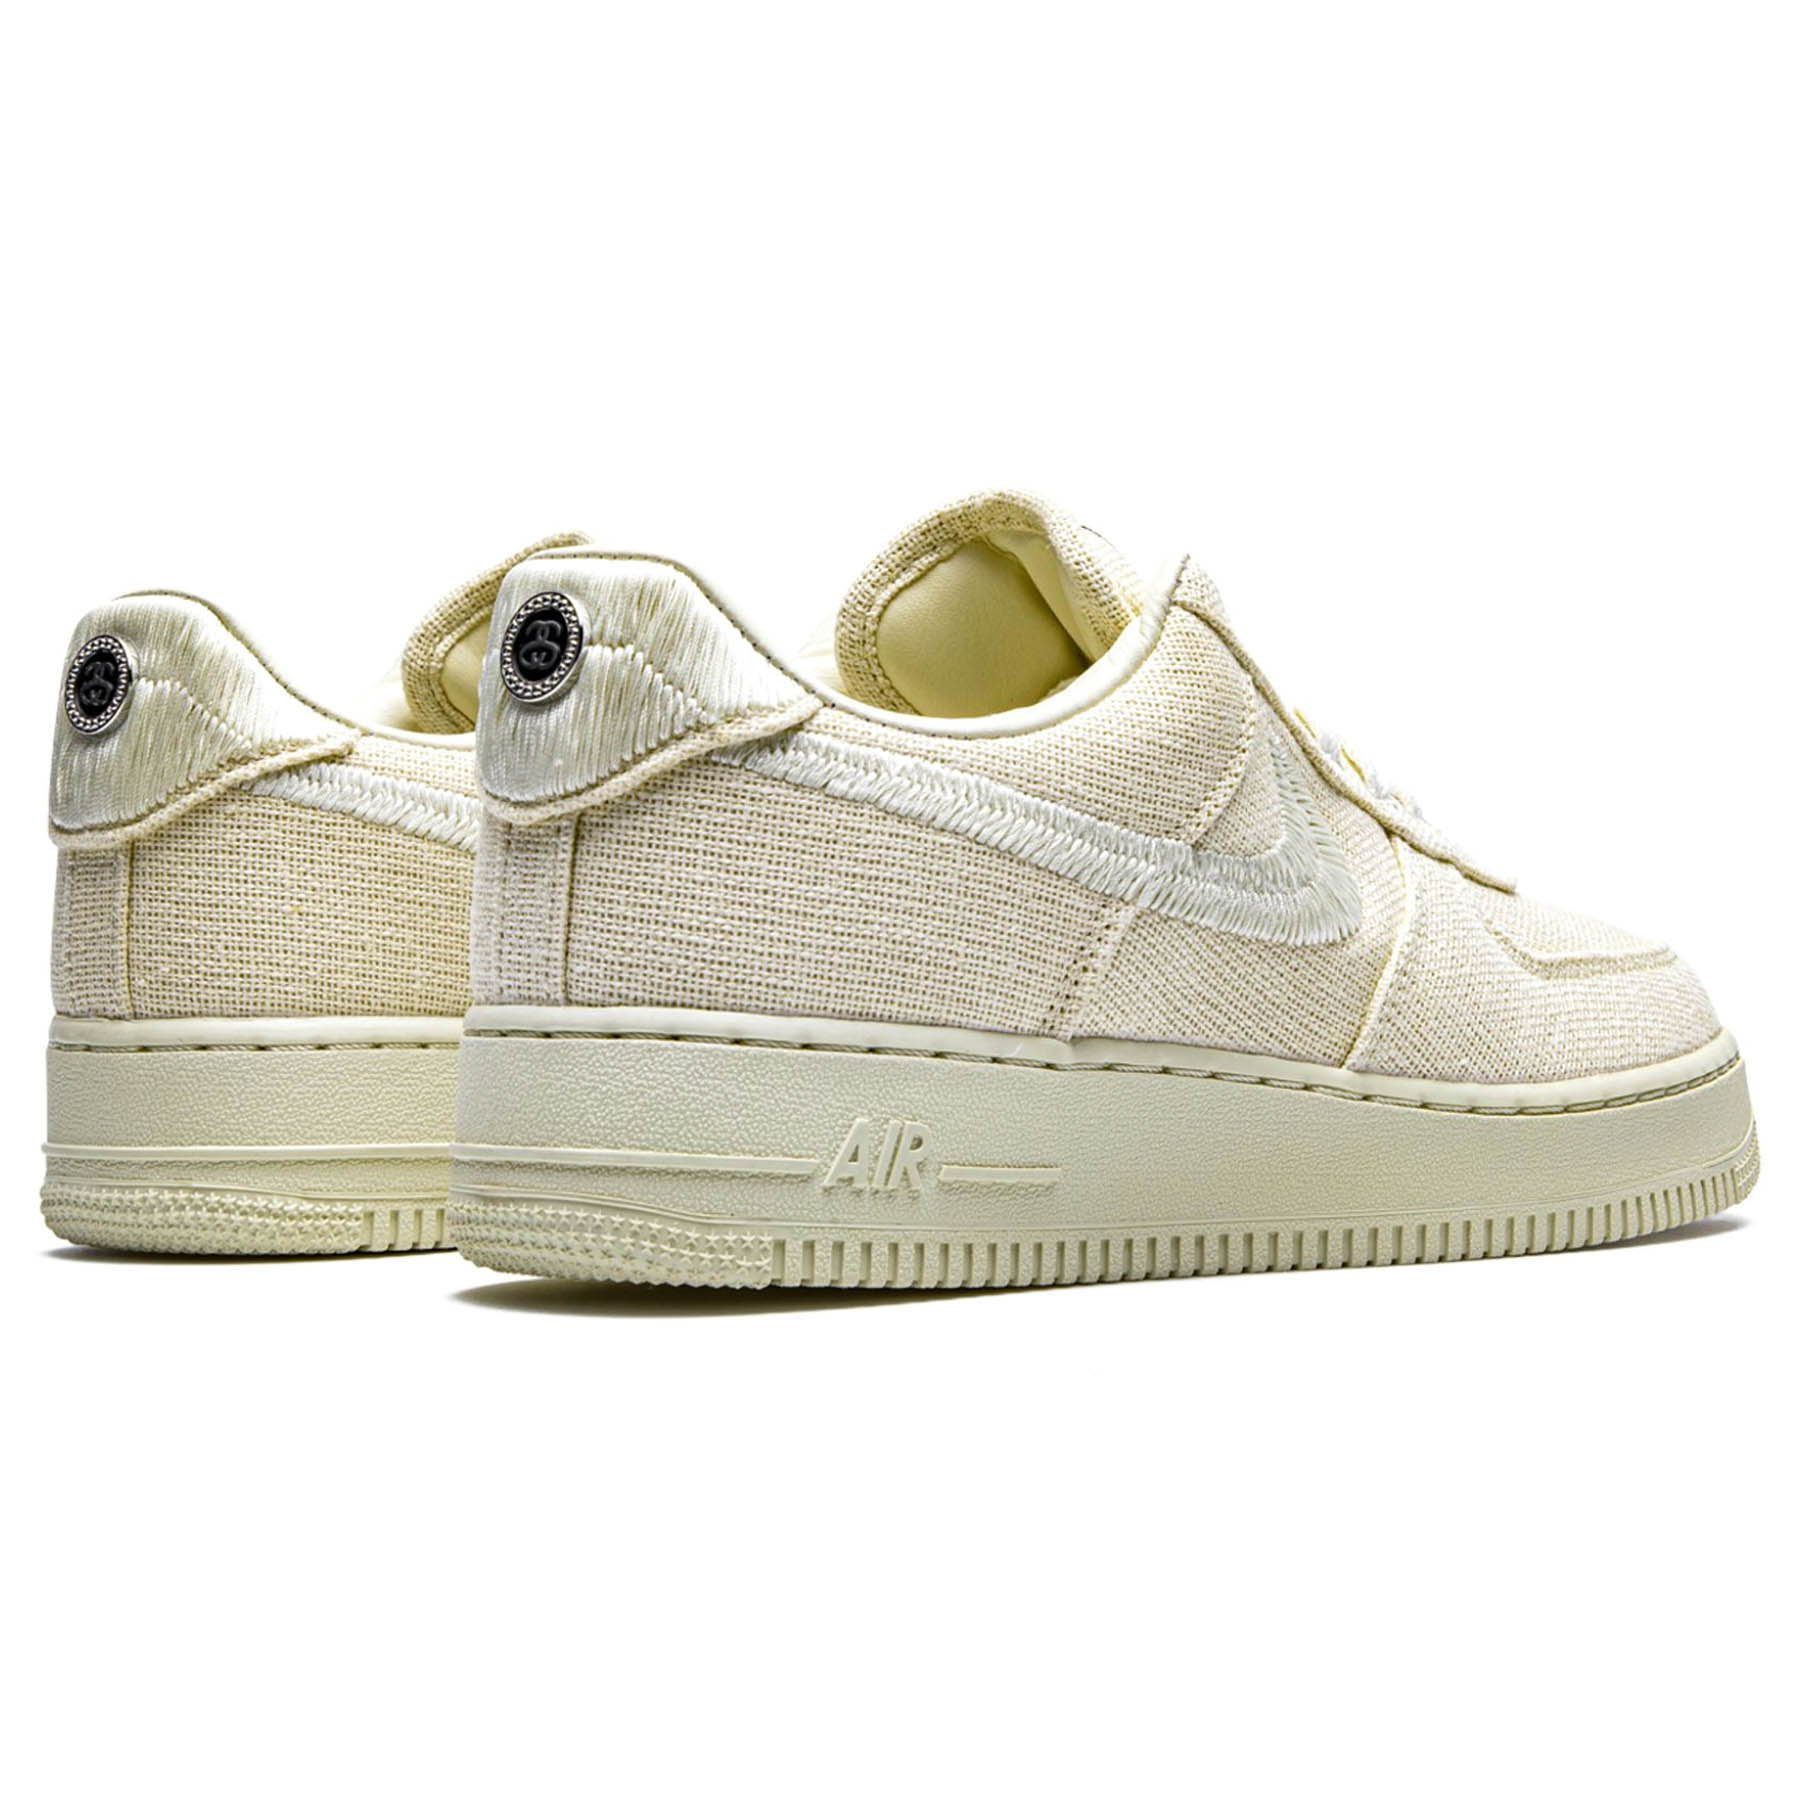 stussy air force 1 fossil women's